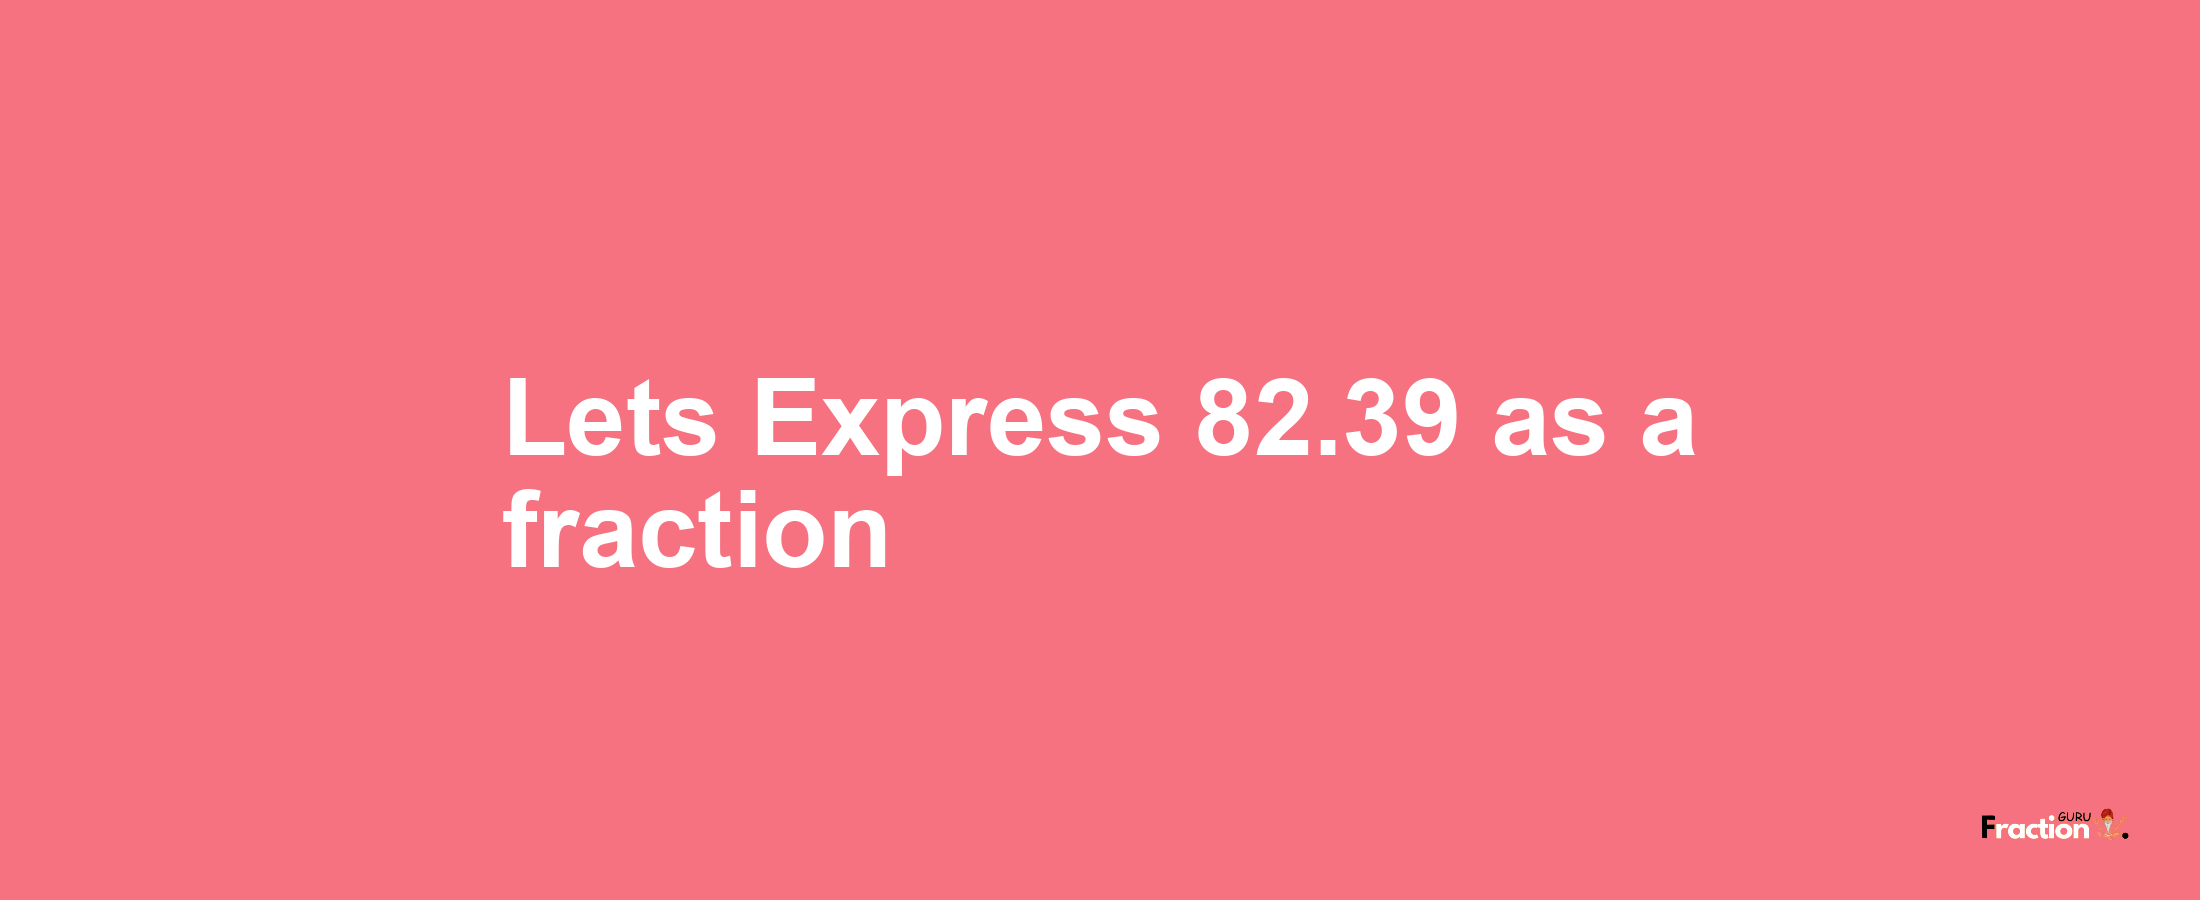 Lets Express 82.39 as afraction